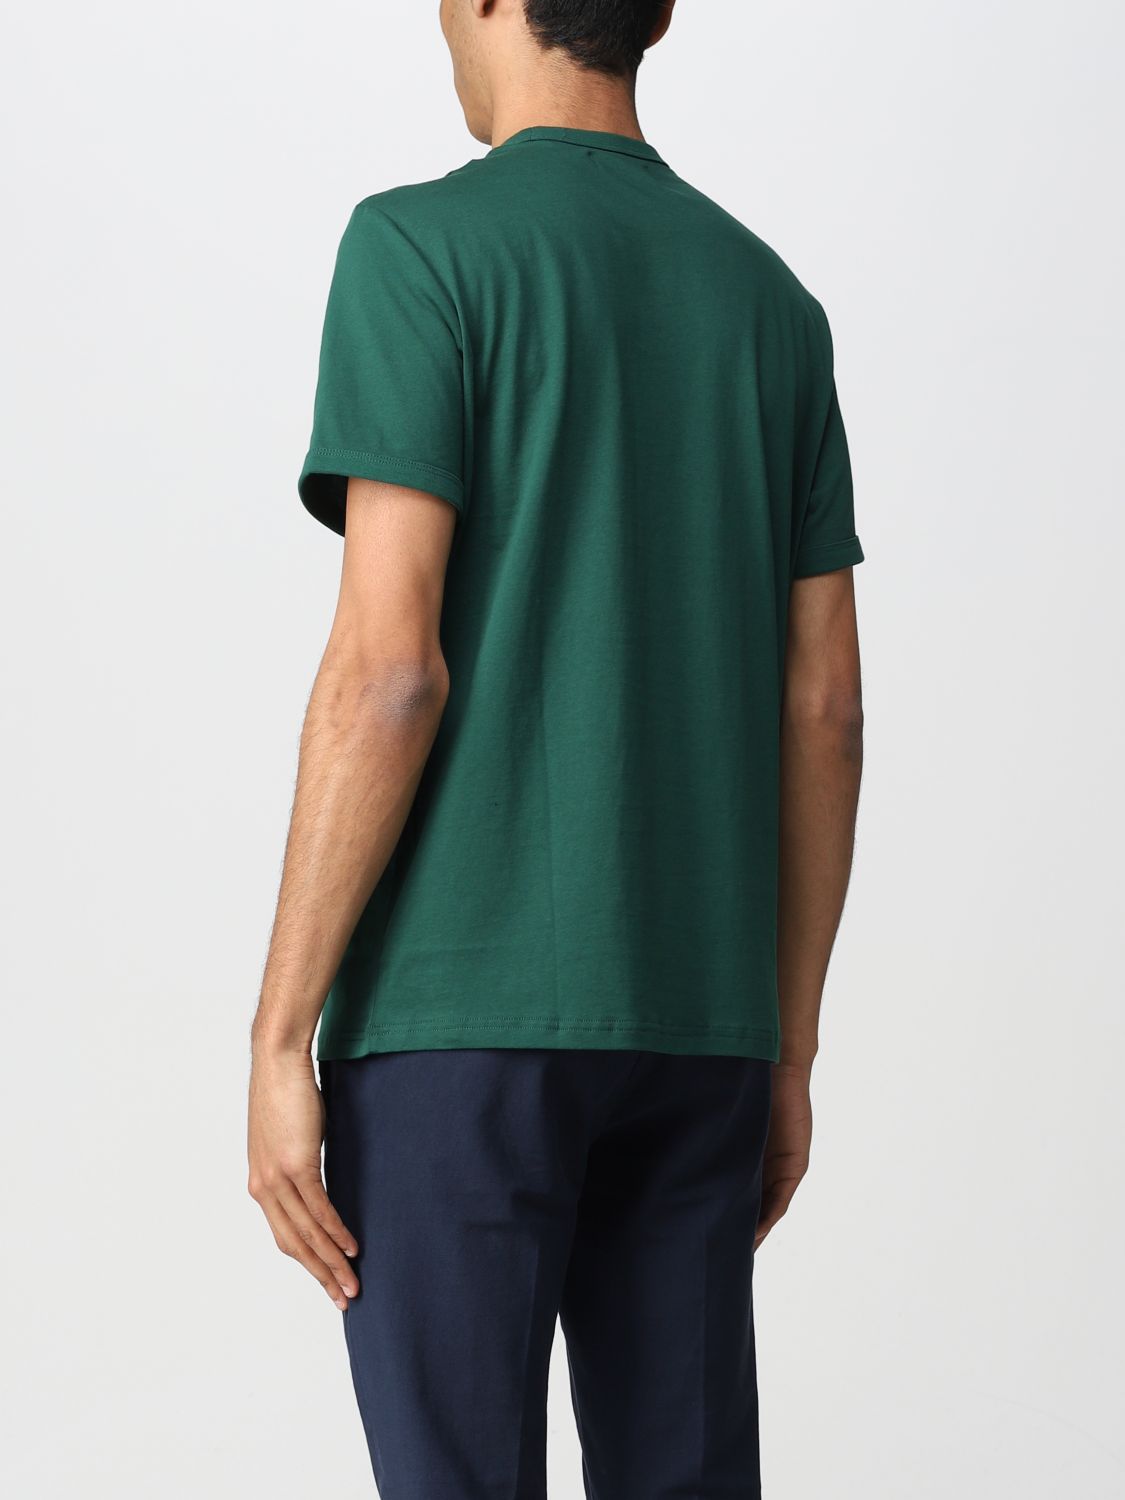 Tシャツ Fred Perry: Tシャツ メンズ Fred Perry グリーン 2